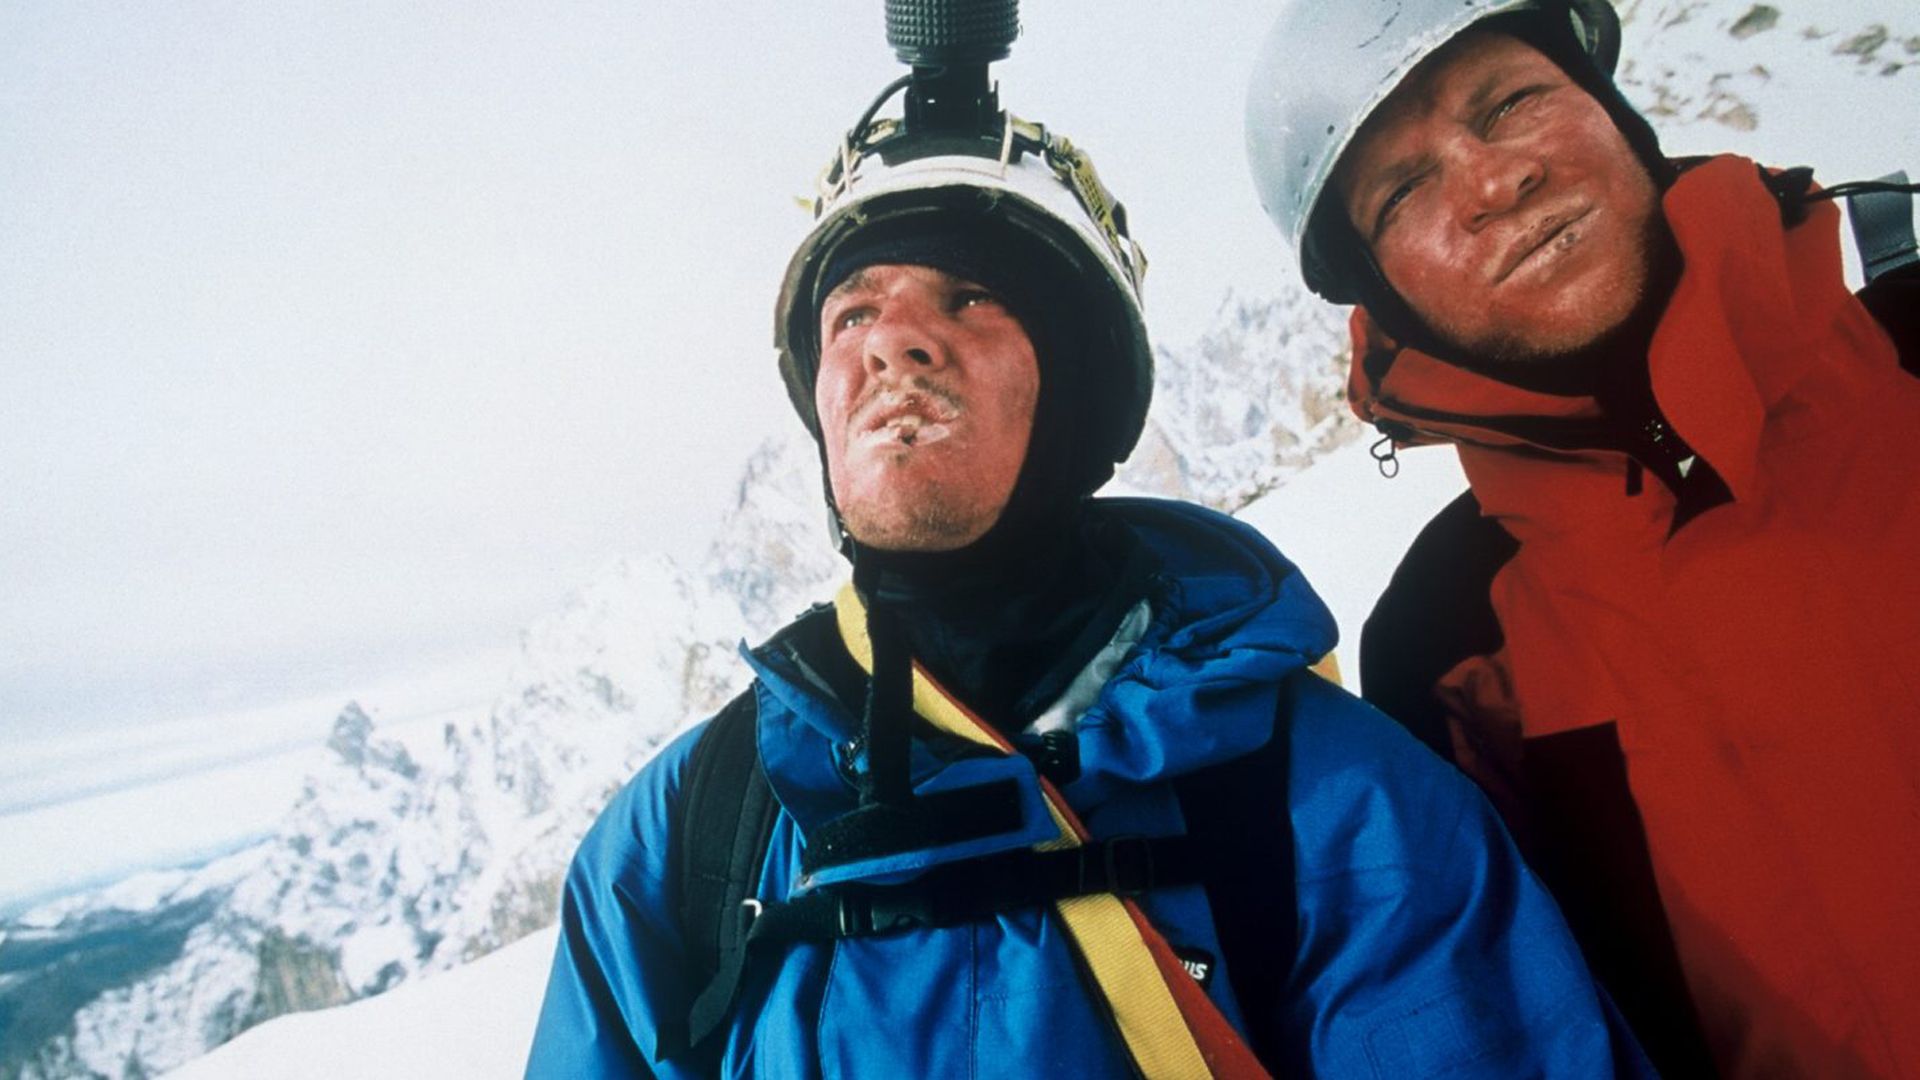 Brendan Mackey and Nicholas Aaron as climbers in Touching the Void